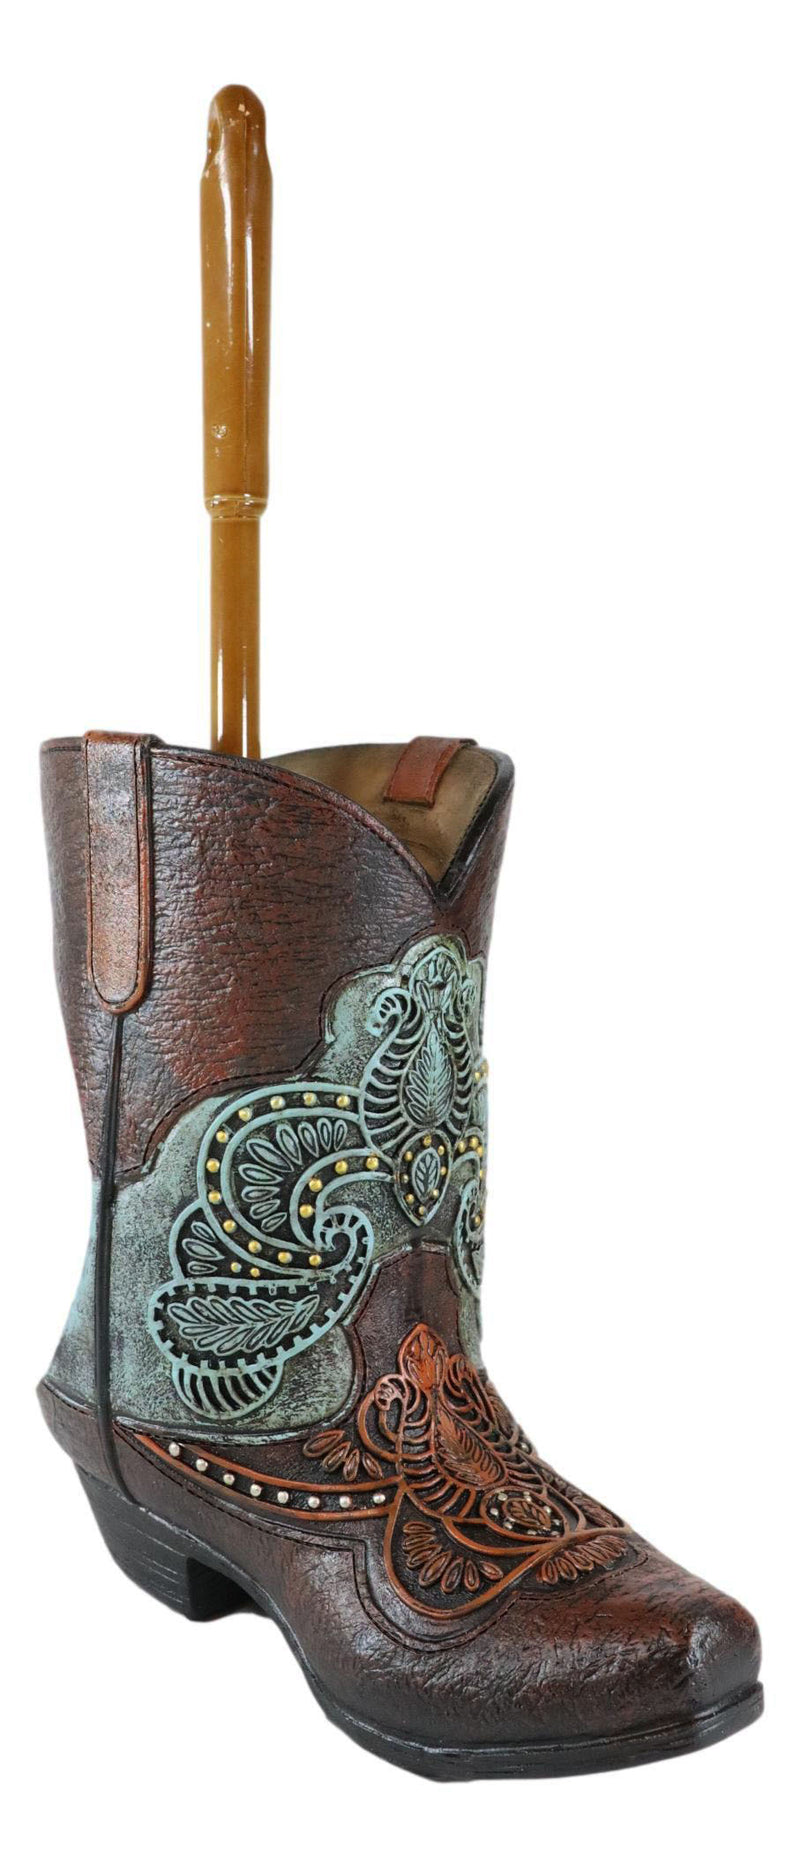 Western Turquoise Floral Tooled Leather Cowboy Boot Toilet Brush And Holder Set